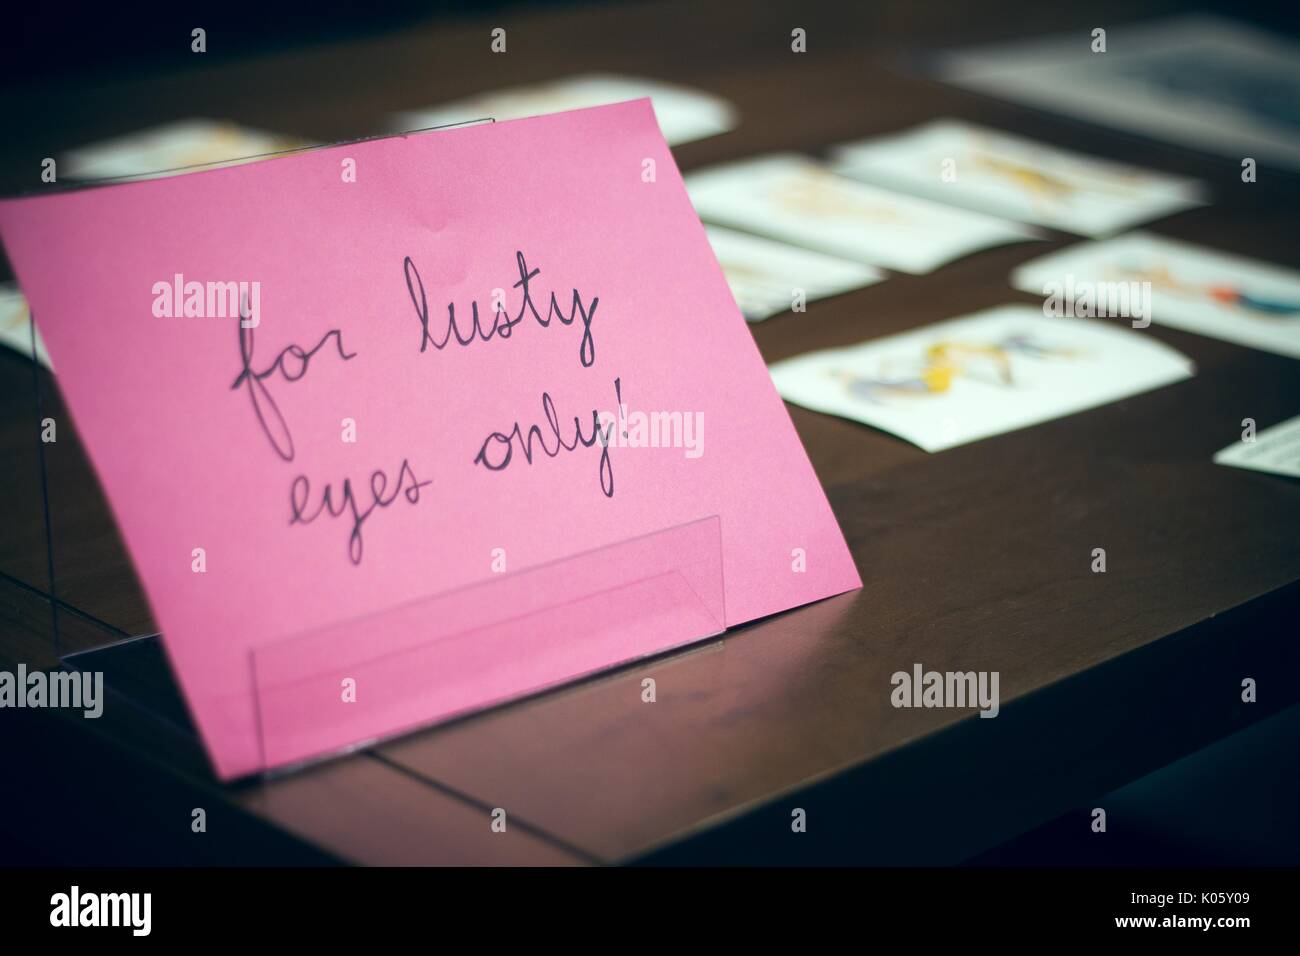 A pink sign reading 'for lusty eyes only' in black cursive writing on a wooden table with materials in soft focus behind it, 2016. Stock Photo